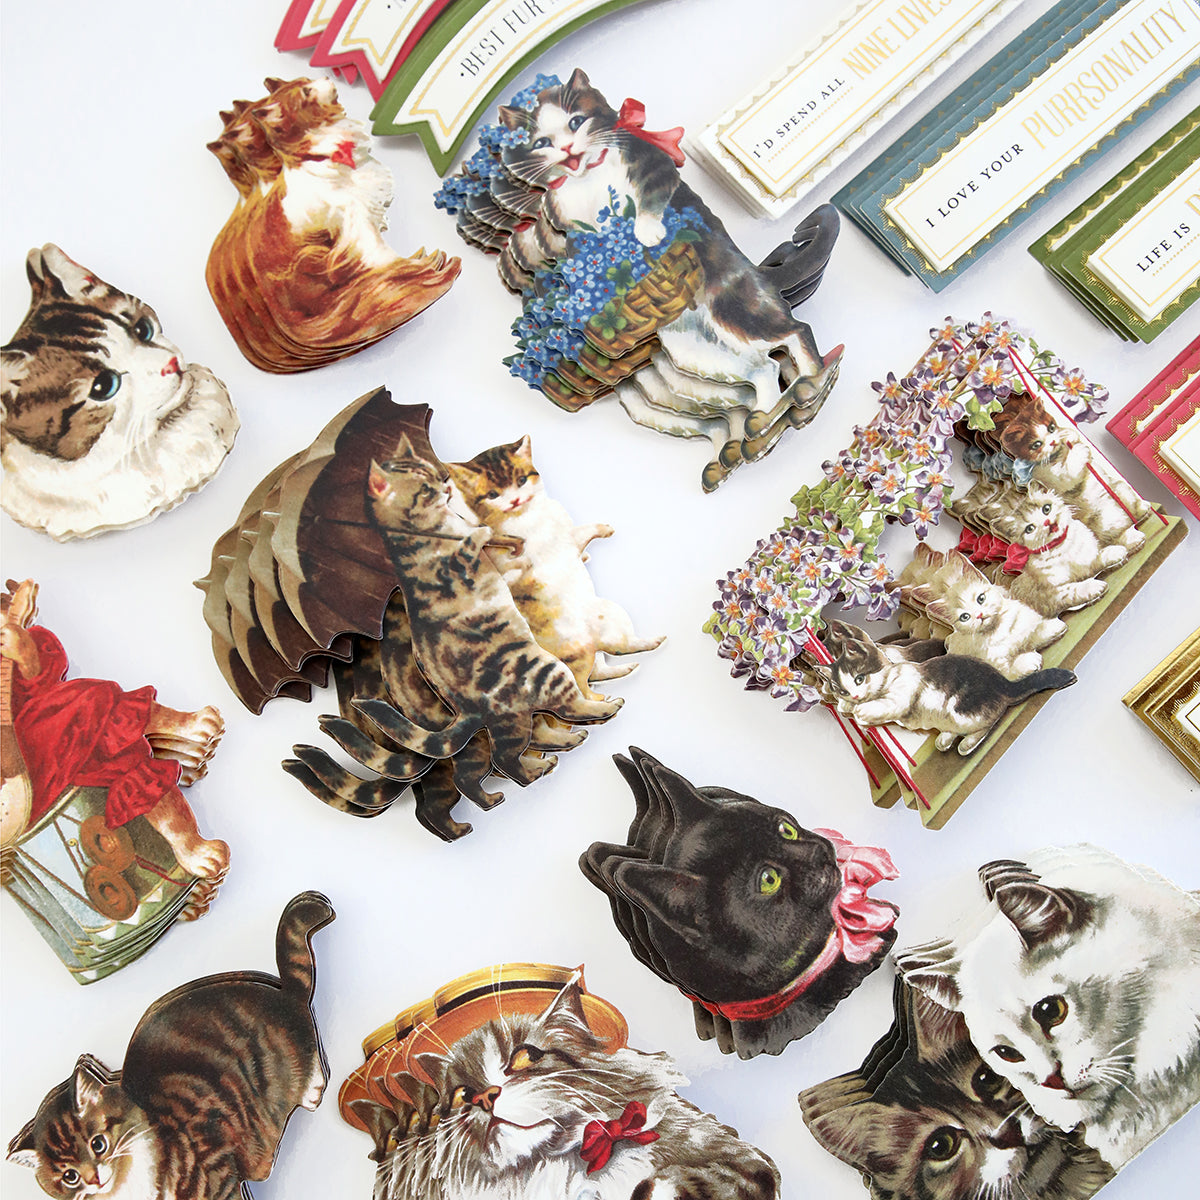 A collection of Fur Baby Cat Stickers and Sentiments, including cats in different poses and with accessories, spread out on a light surface for cat lovers.